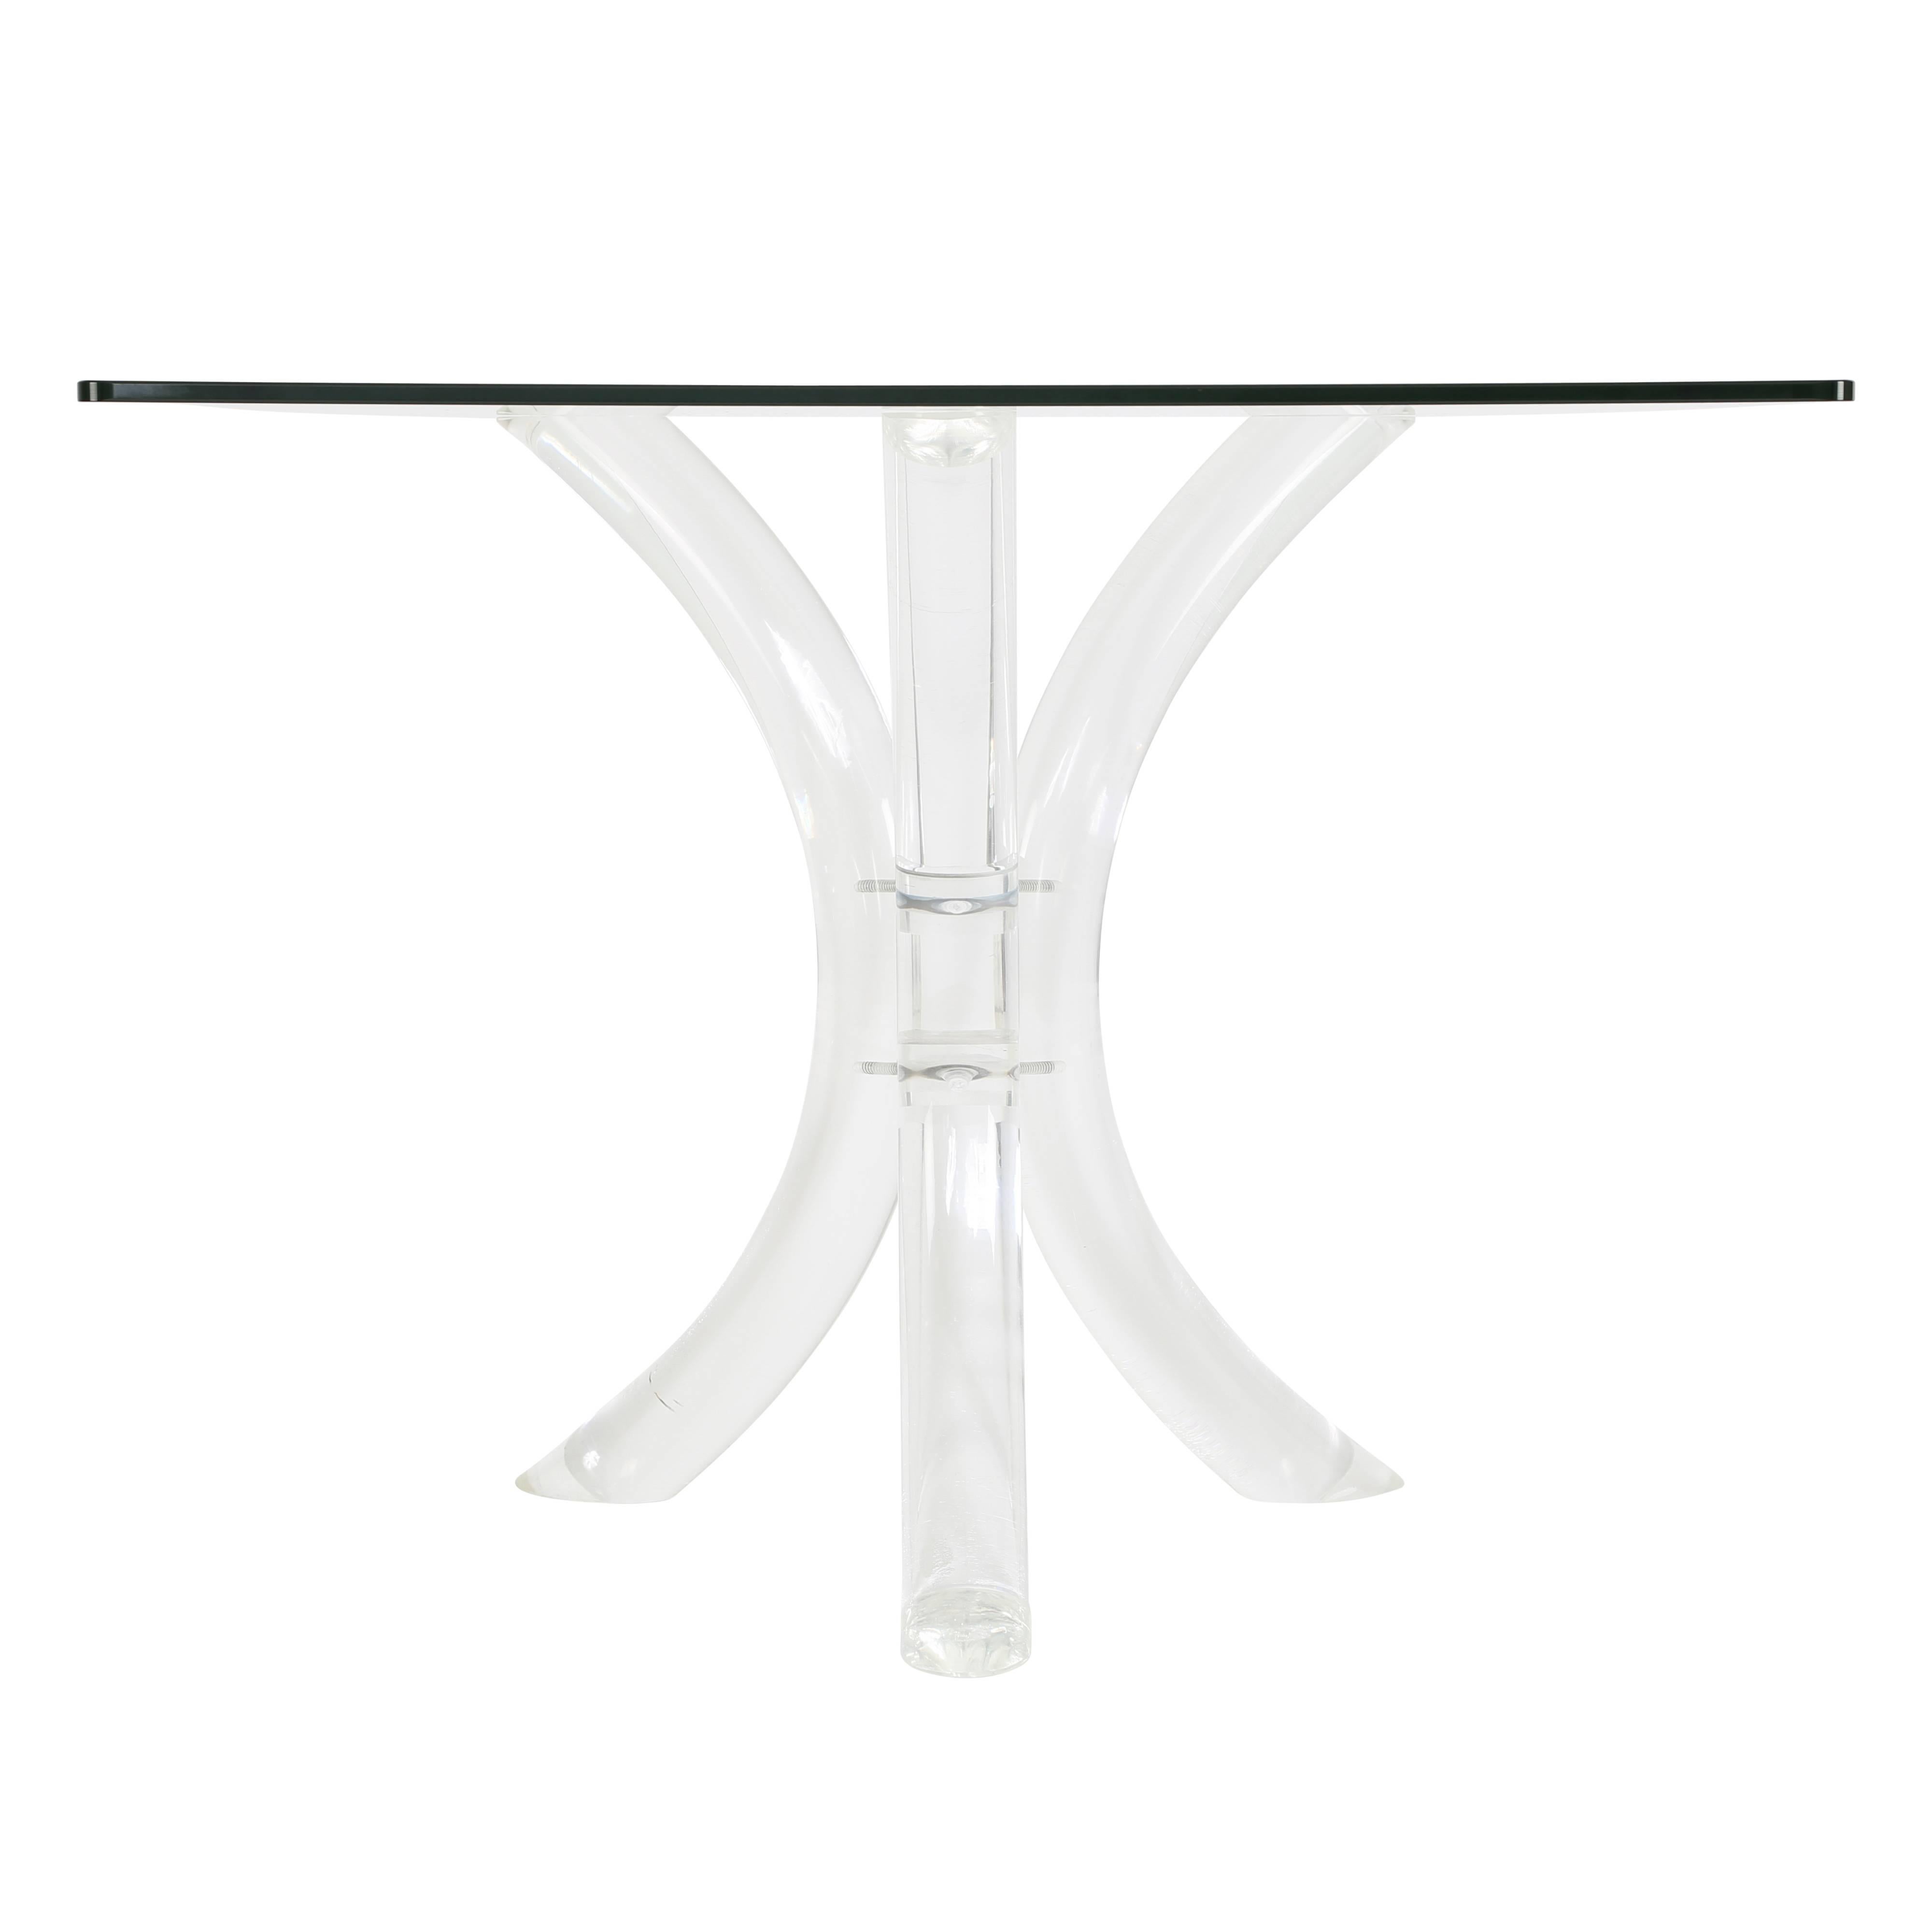 Three thick and gracefully curved Lucite legs support a 1/2